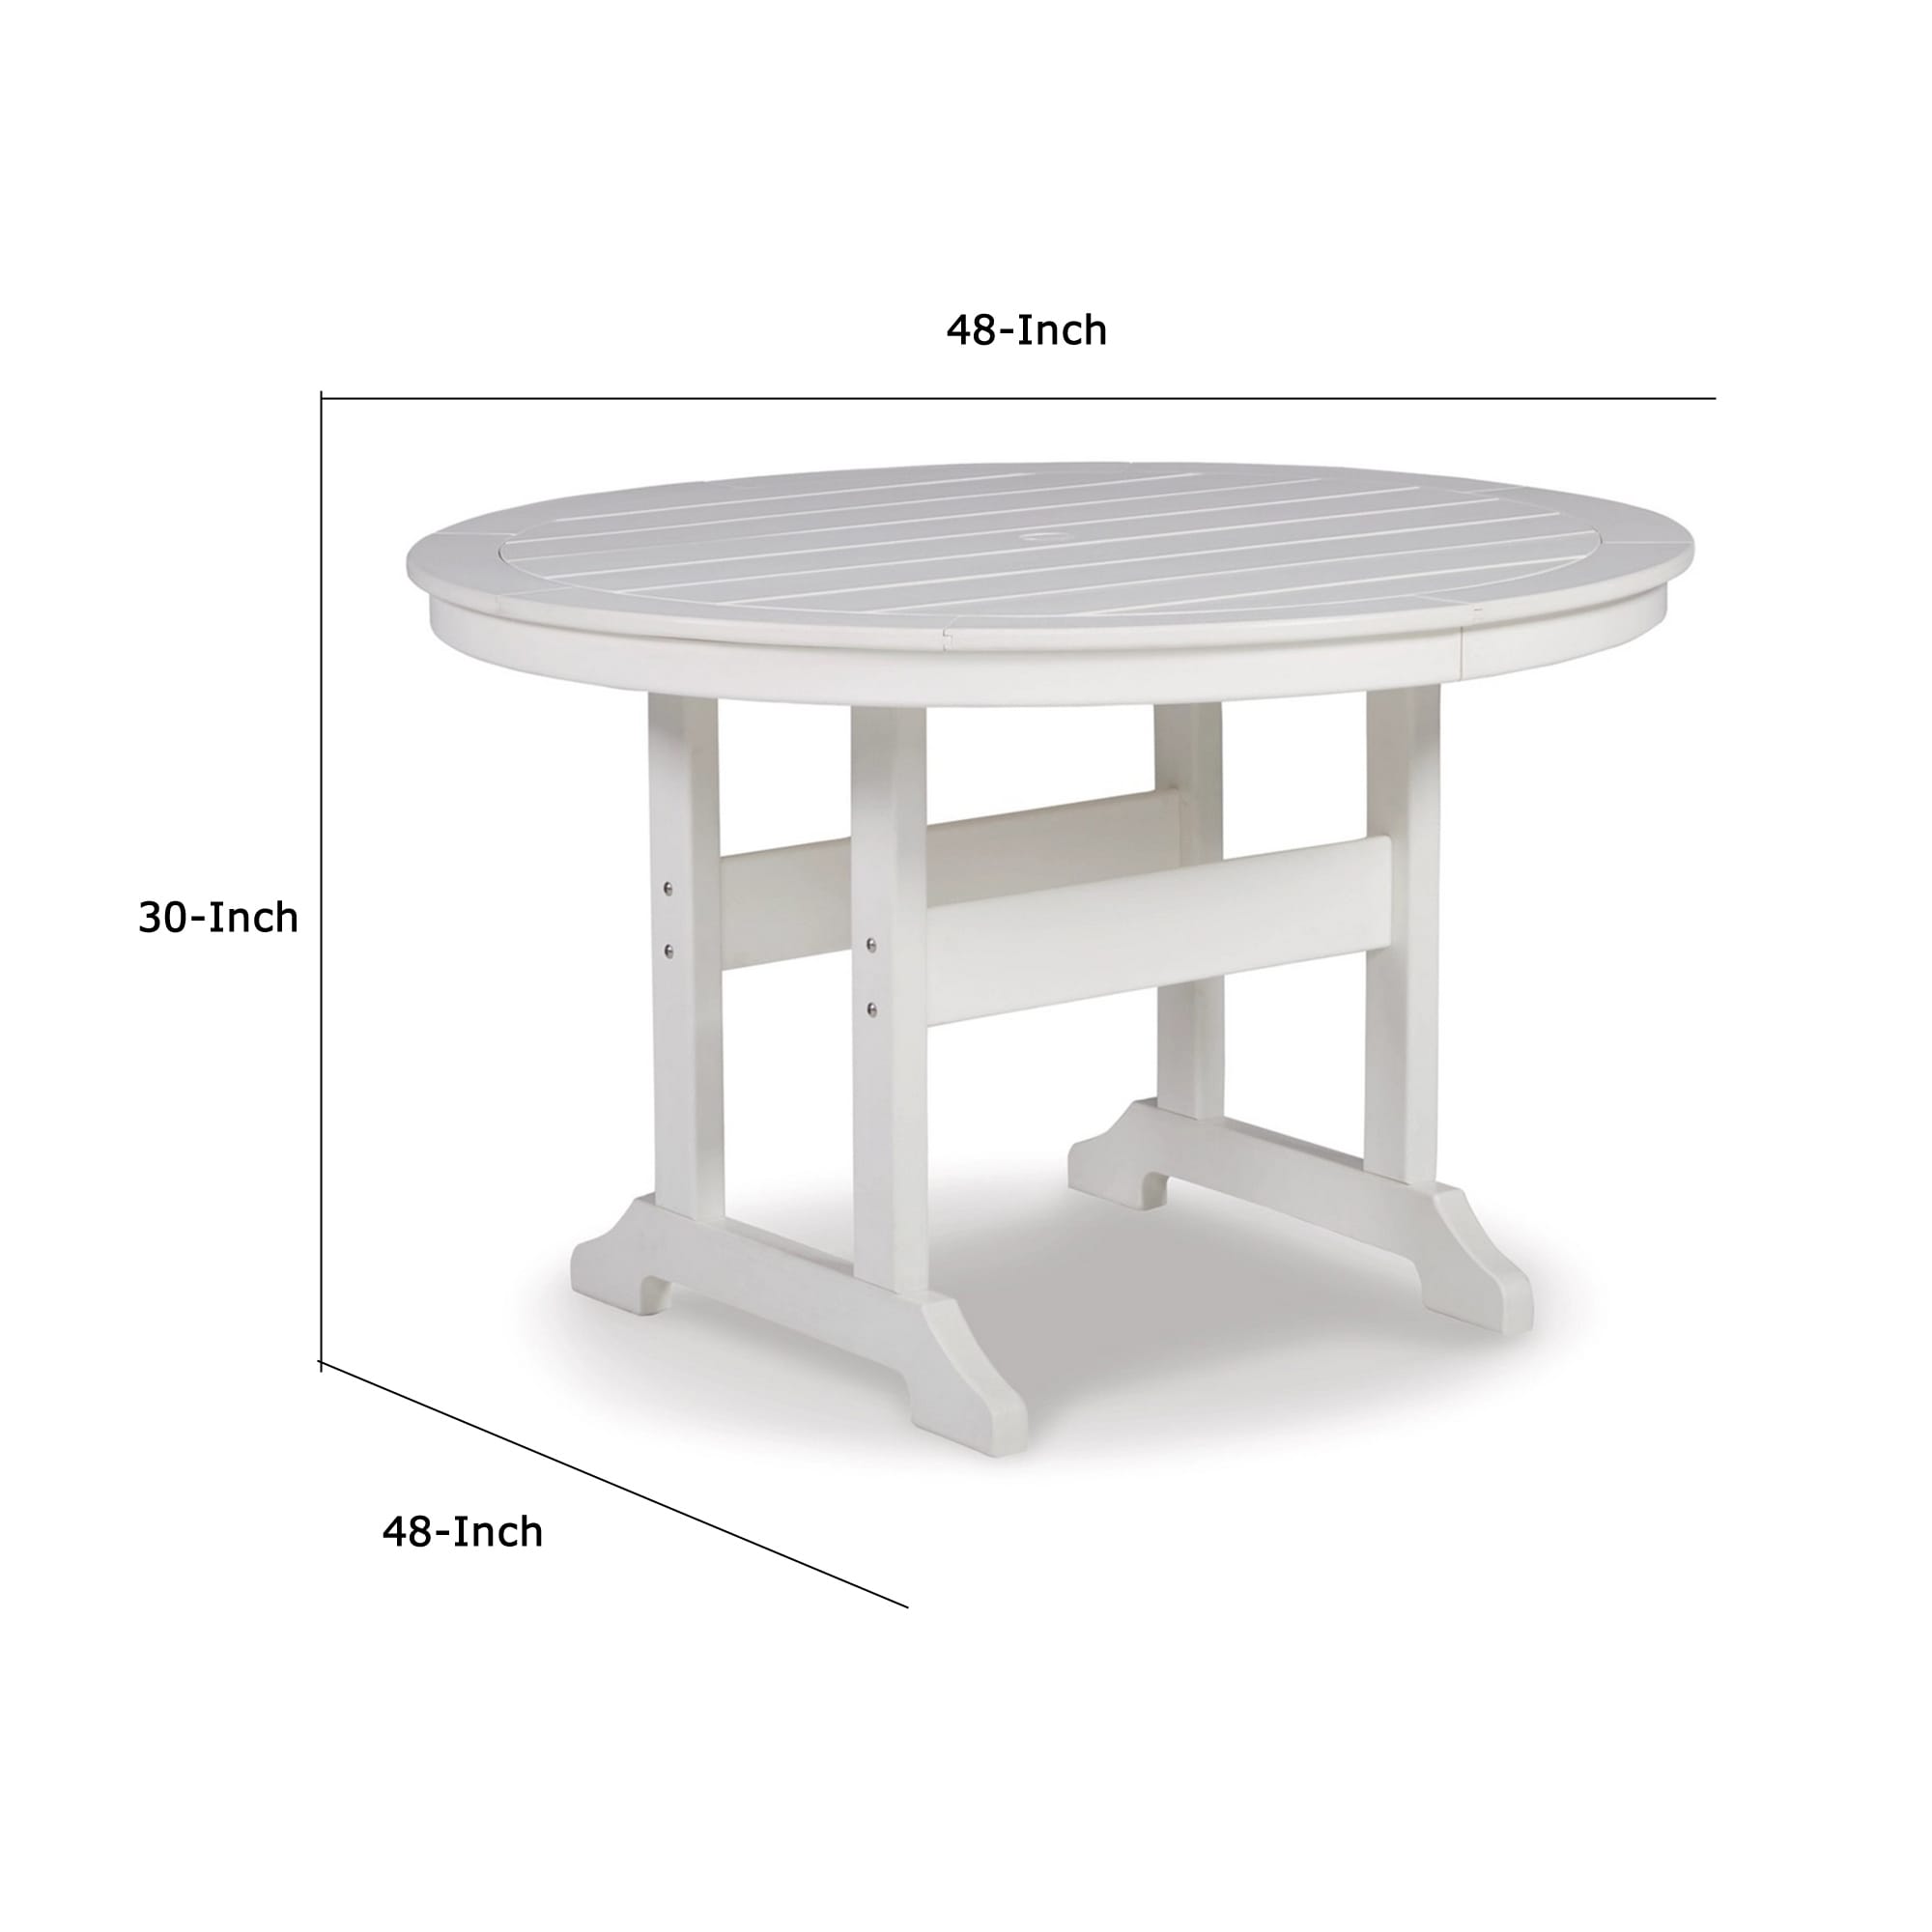 48 Inch Round Dining Table with Trestle Legs, Umbrella Hole, White Finish